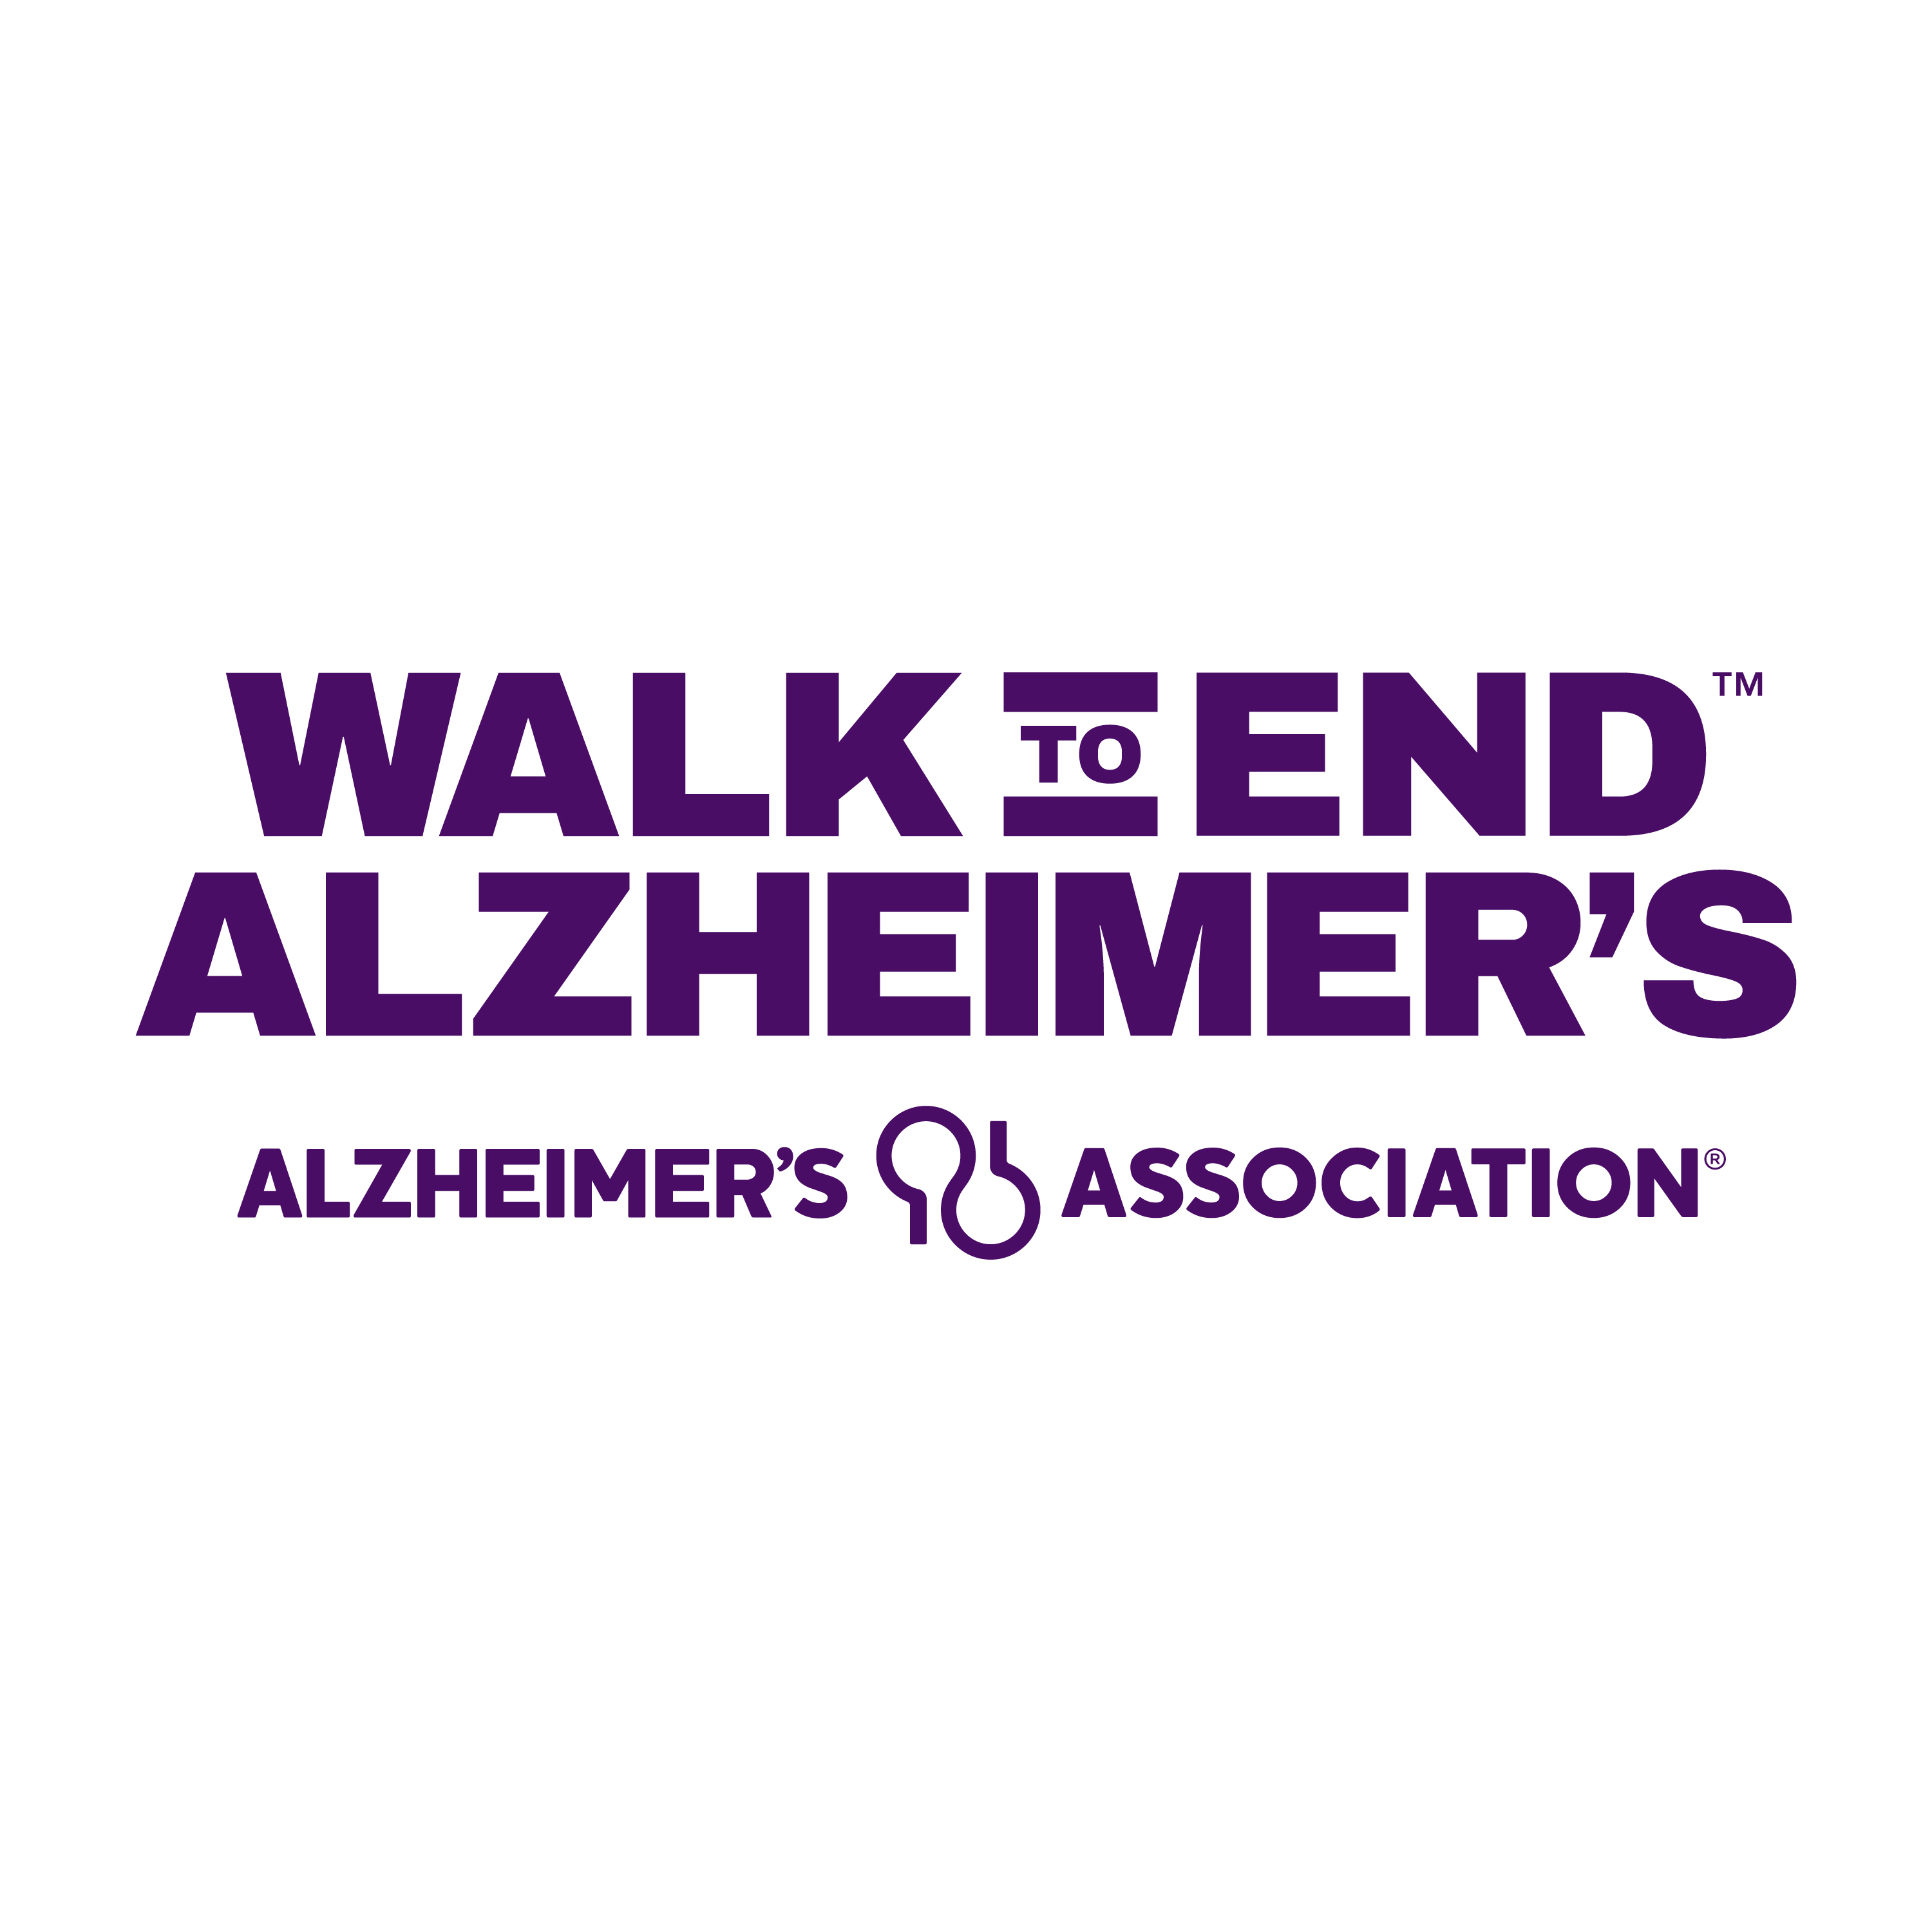 Event Promo Photo For Snohomish County Walk to End Alzheimer's